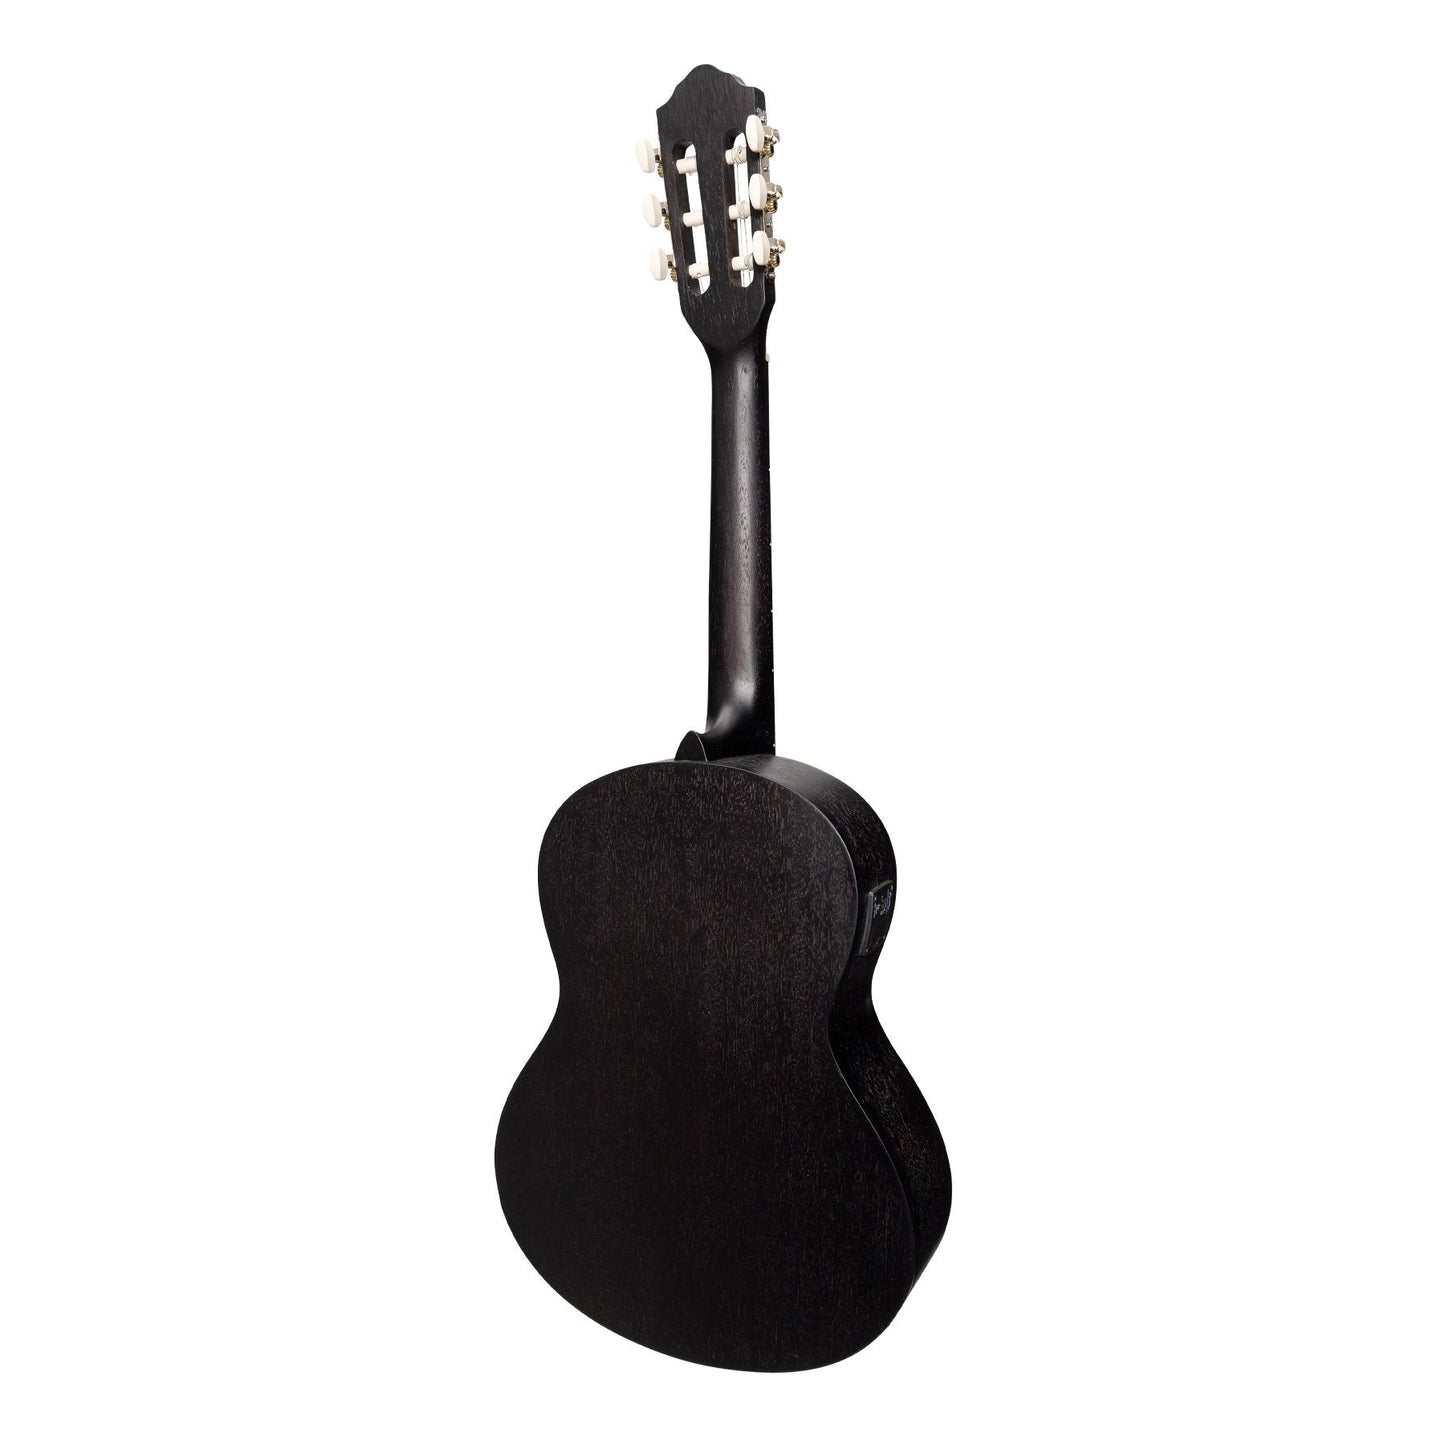 Martinez 'Slim Jim' 3/4 Size Student Classical Guitar with Built In Tuner (Black)